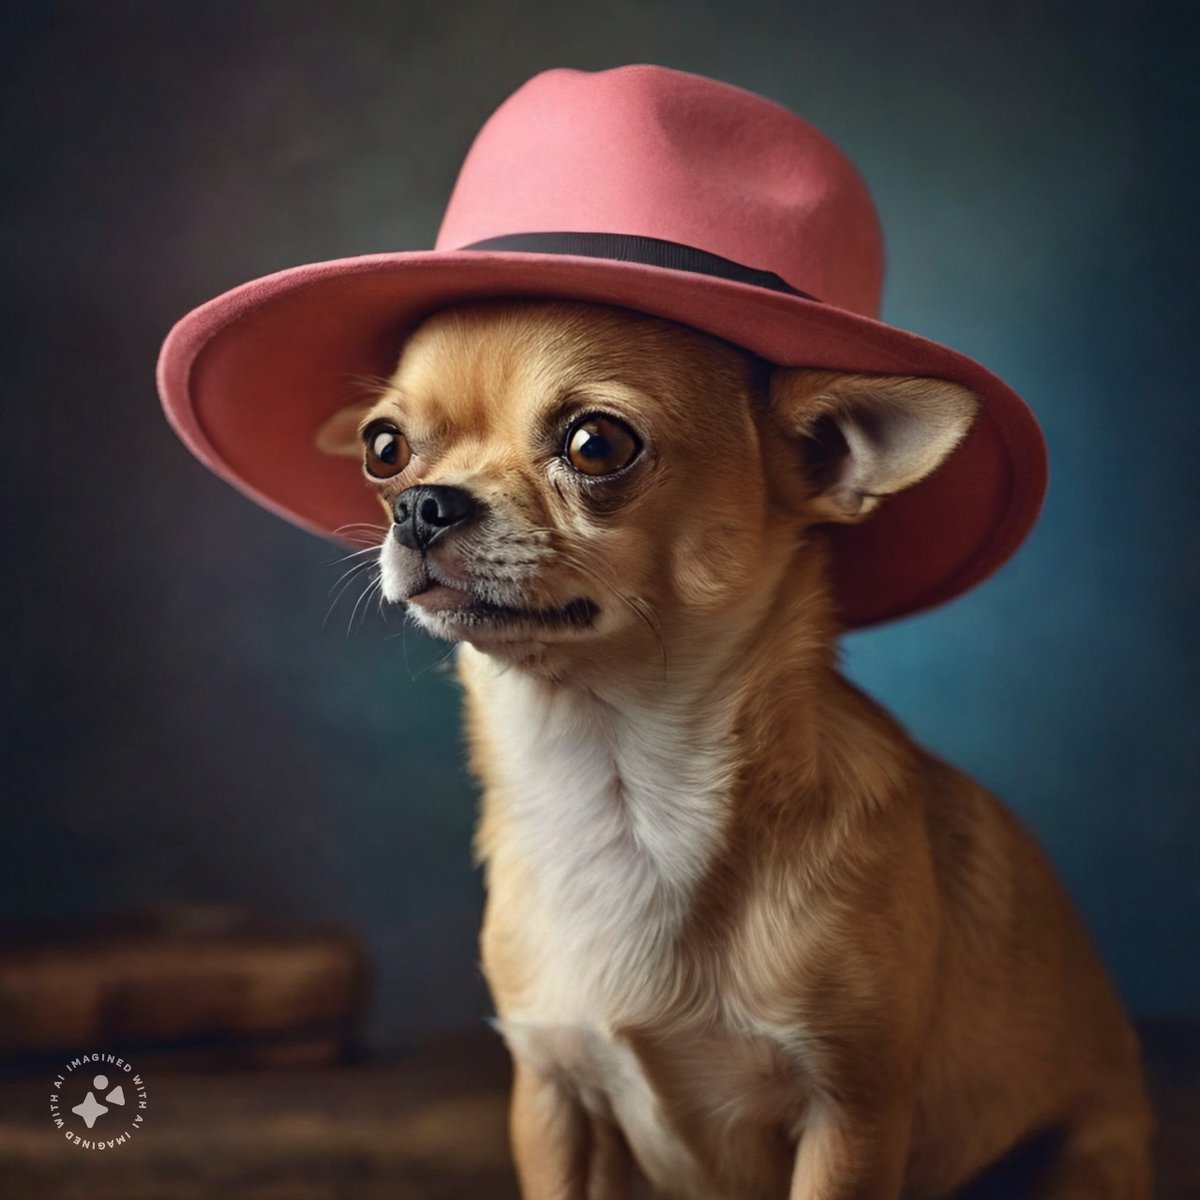 Imagine with Meta AI generated the most realistic Chihuahuas we've ever seen. Without a doubt, Meta AI blows Dalle3 and Midjourney out the water when it comes to realism. #AIpup #AiChihuahuas #Chihuahua #ChihuahuaLover #ChihuahuaLove #META